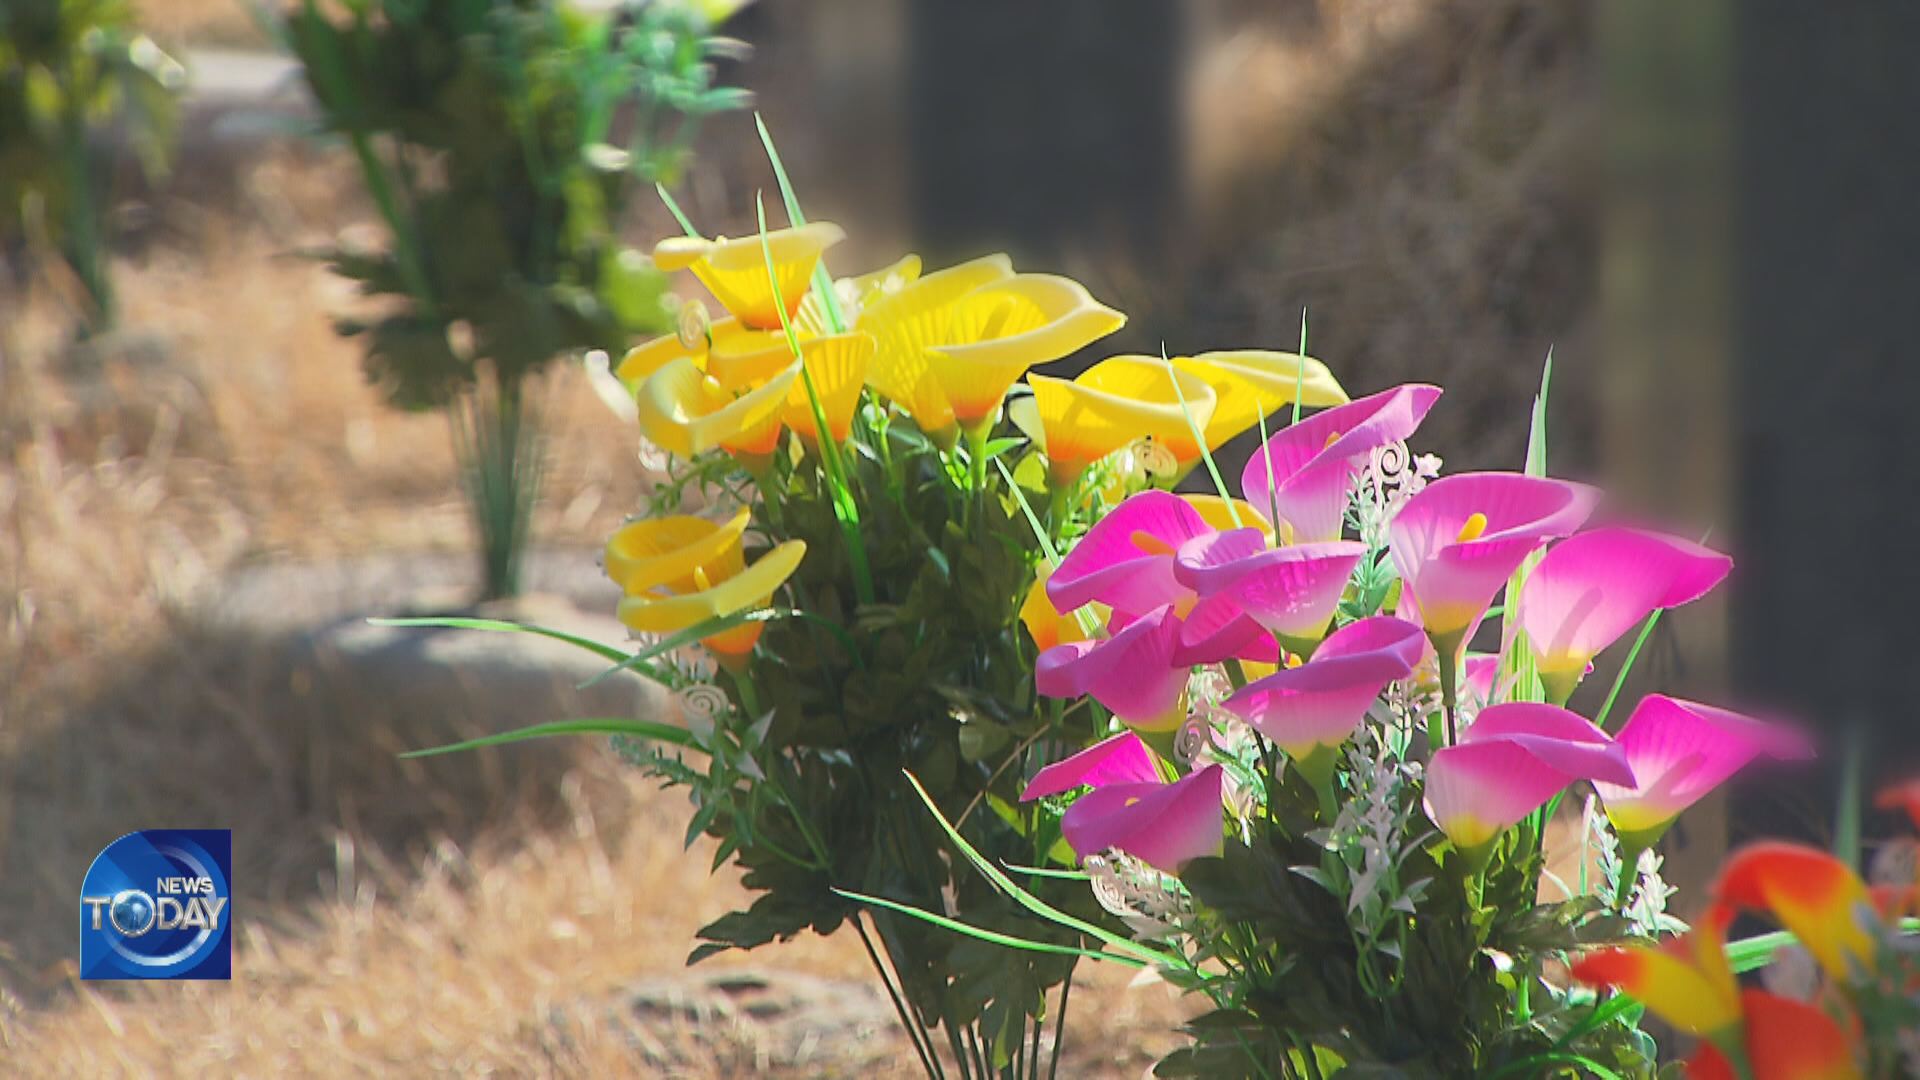 REAL FLOWERS REPLACE PLASTIC AT CEMETERIES